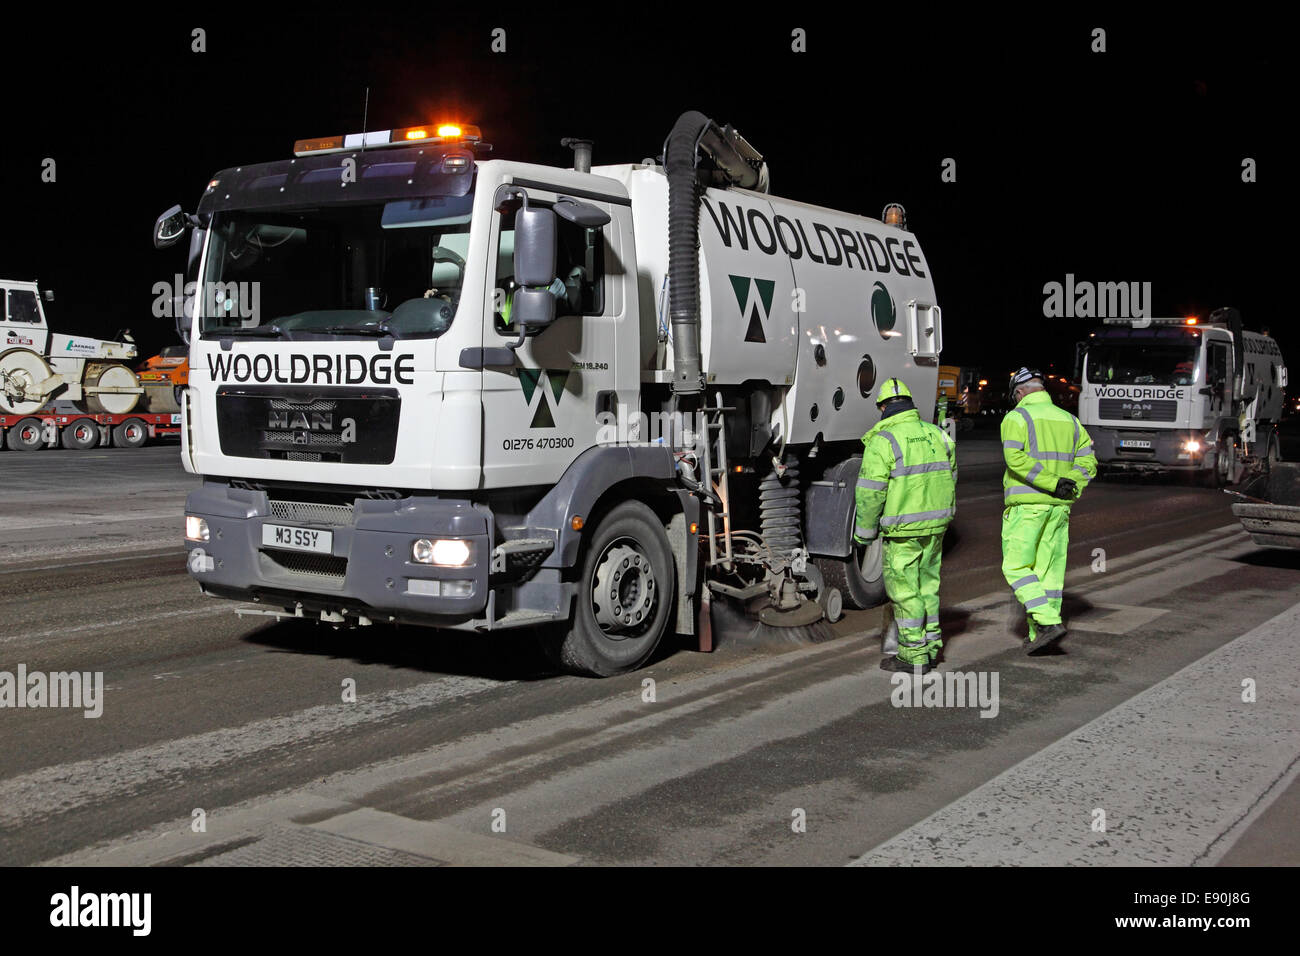 Maintenance teams resurface an airport runway during an overnight closure. A sweeping lorry removes debris prior to resurfacing Stock Photo